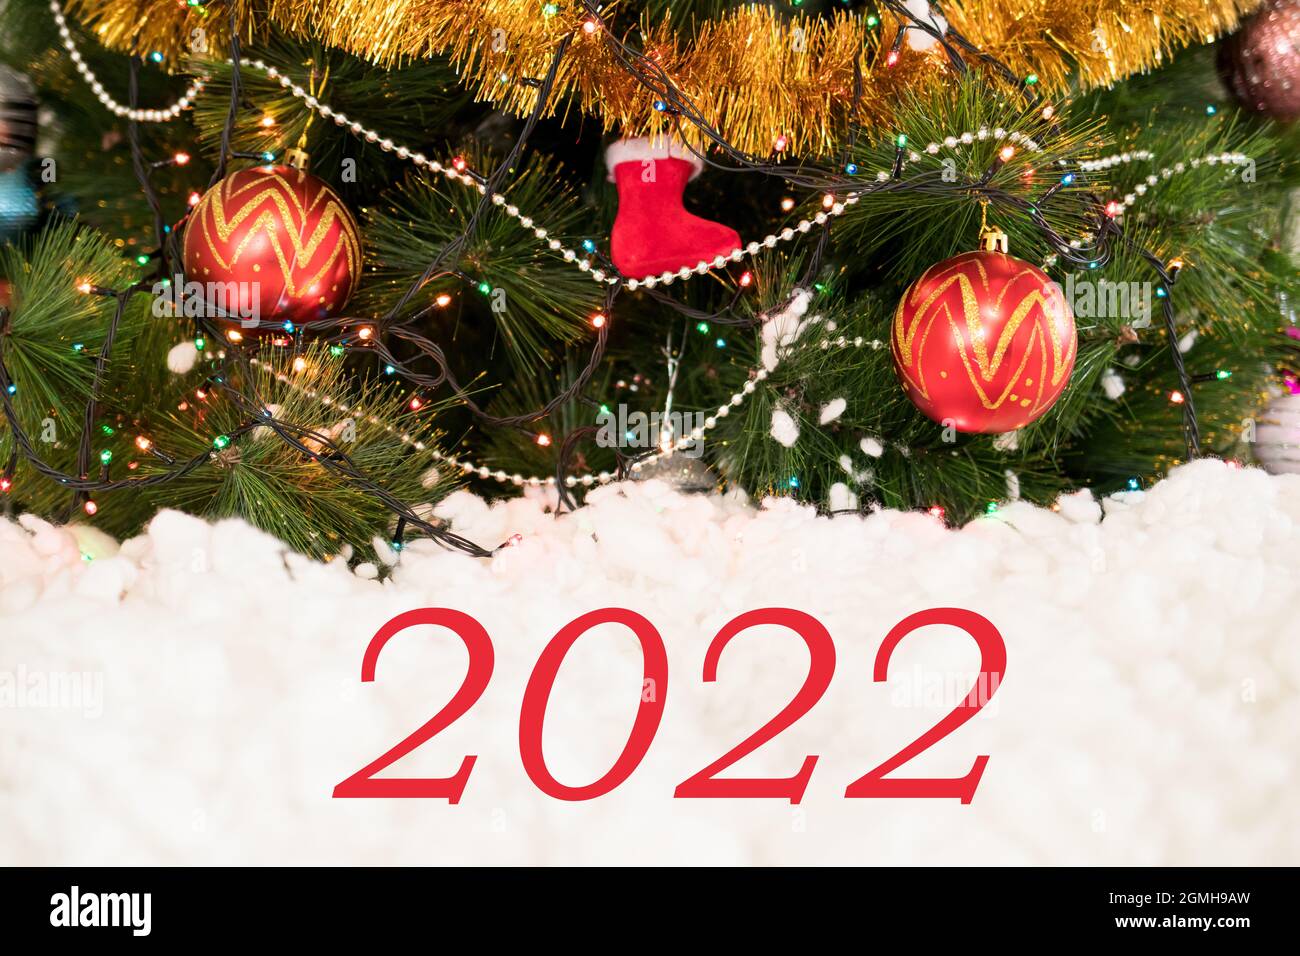 Page 6 - Holiday 2022 High Resolution Stock Photography and Images 